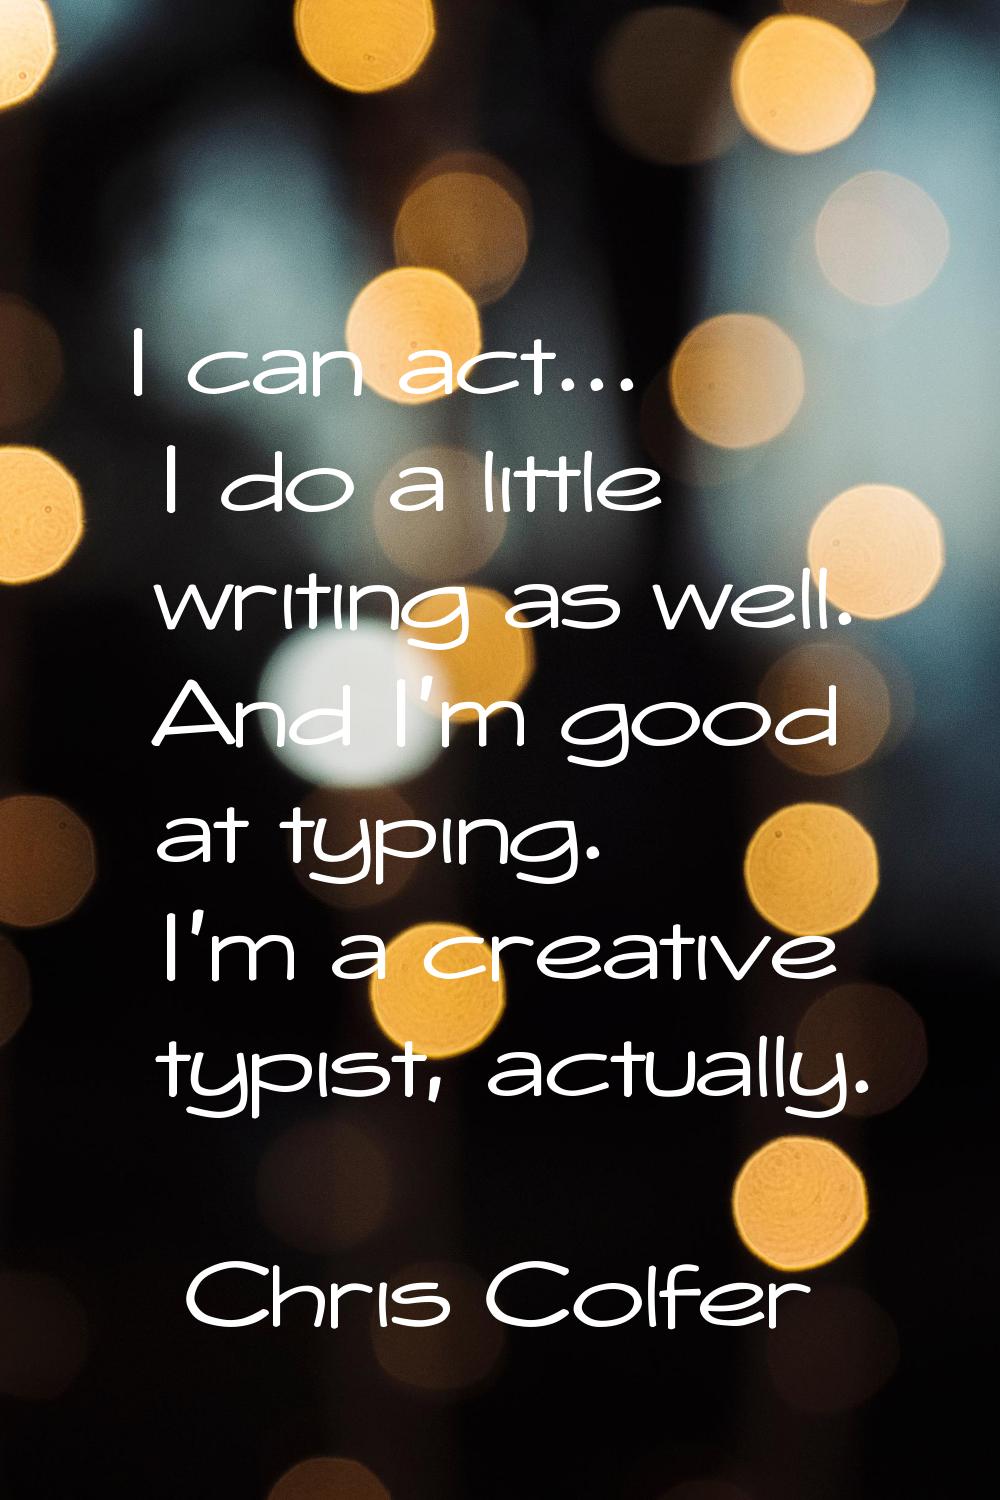 I can act... I do a little writing as well. And I'm good at typing. I'm a creative typist, actually